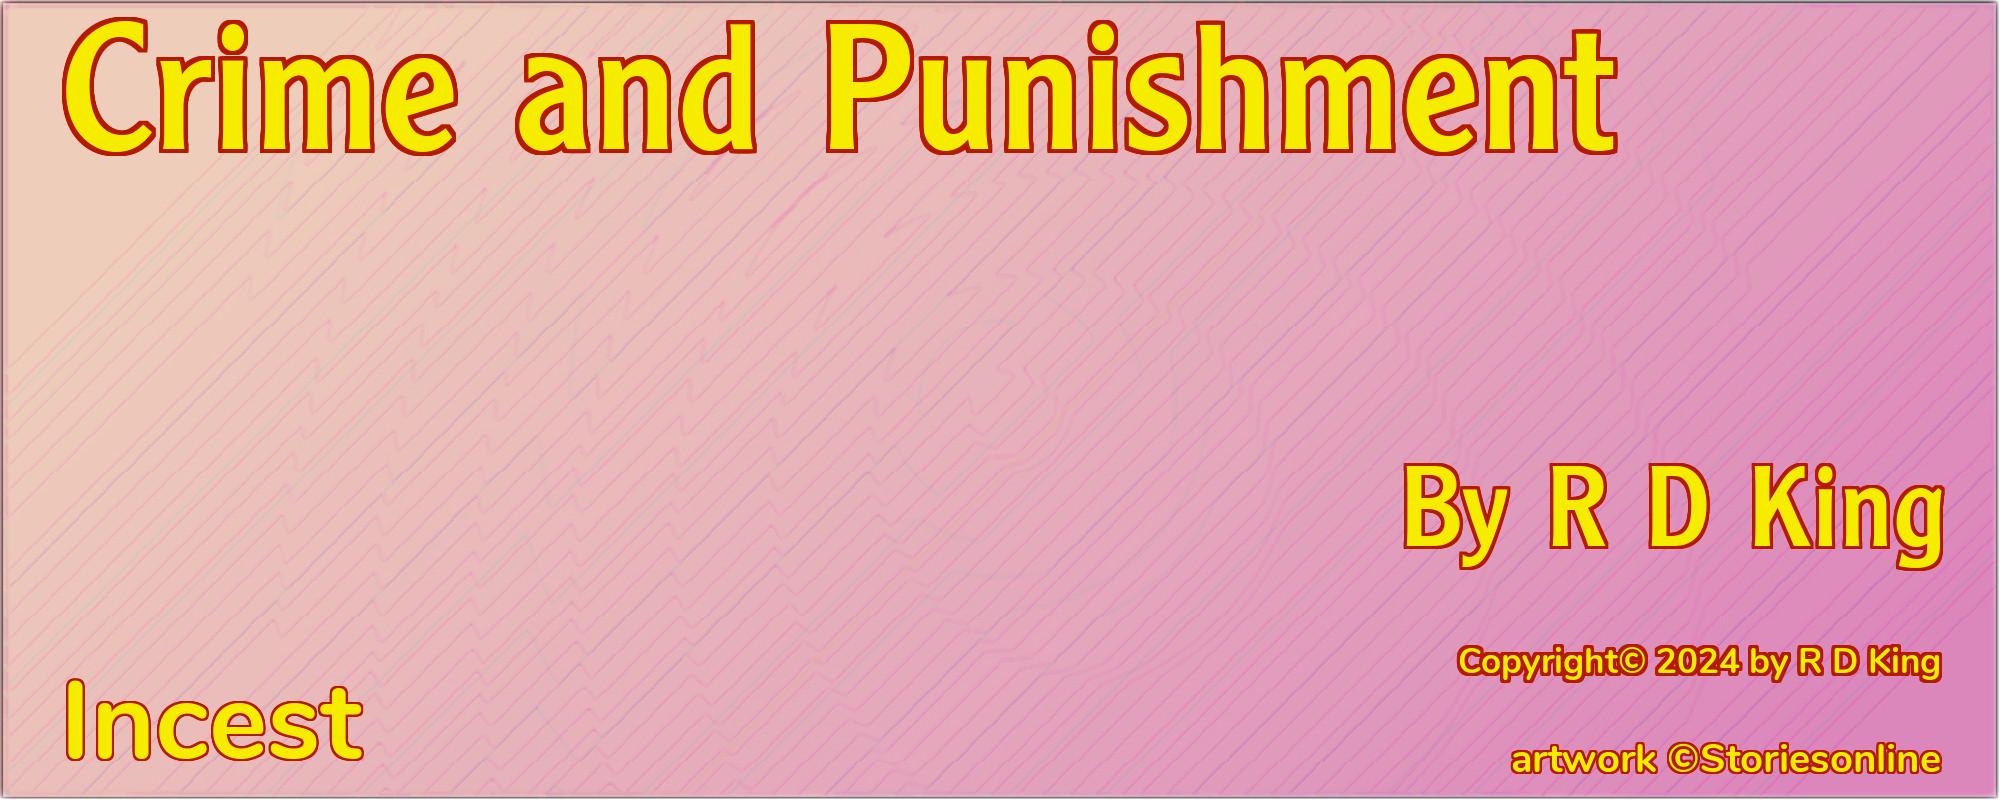 Crime and Punishment - Cover